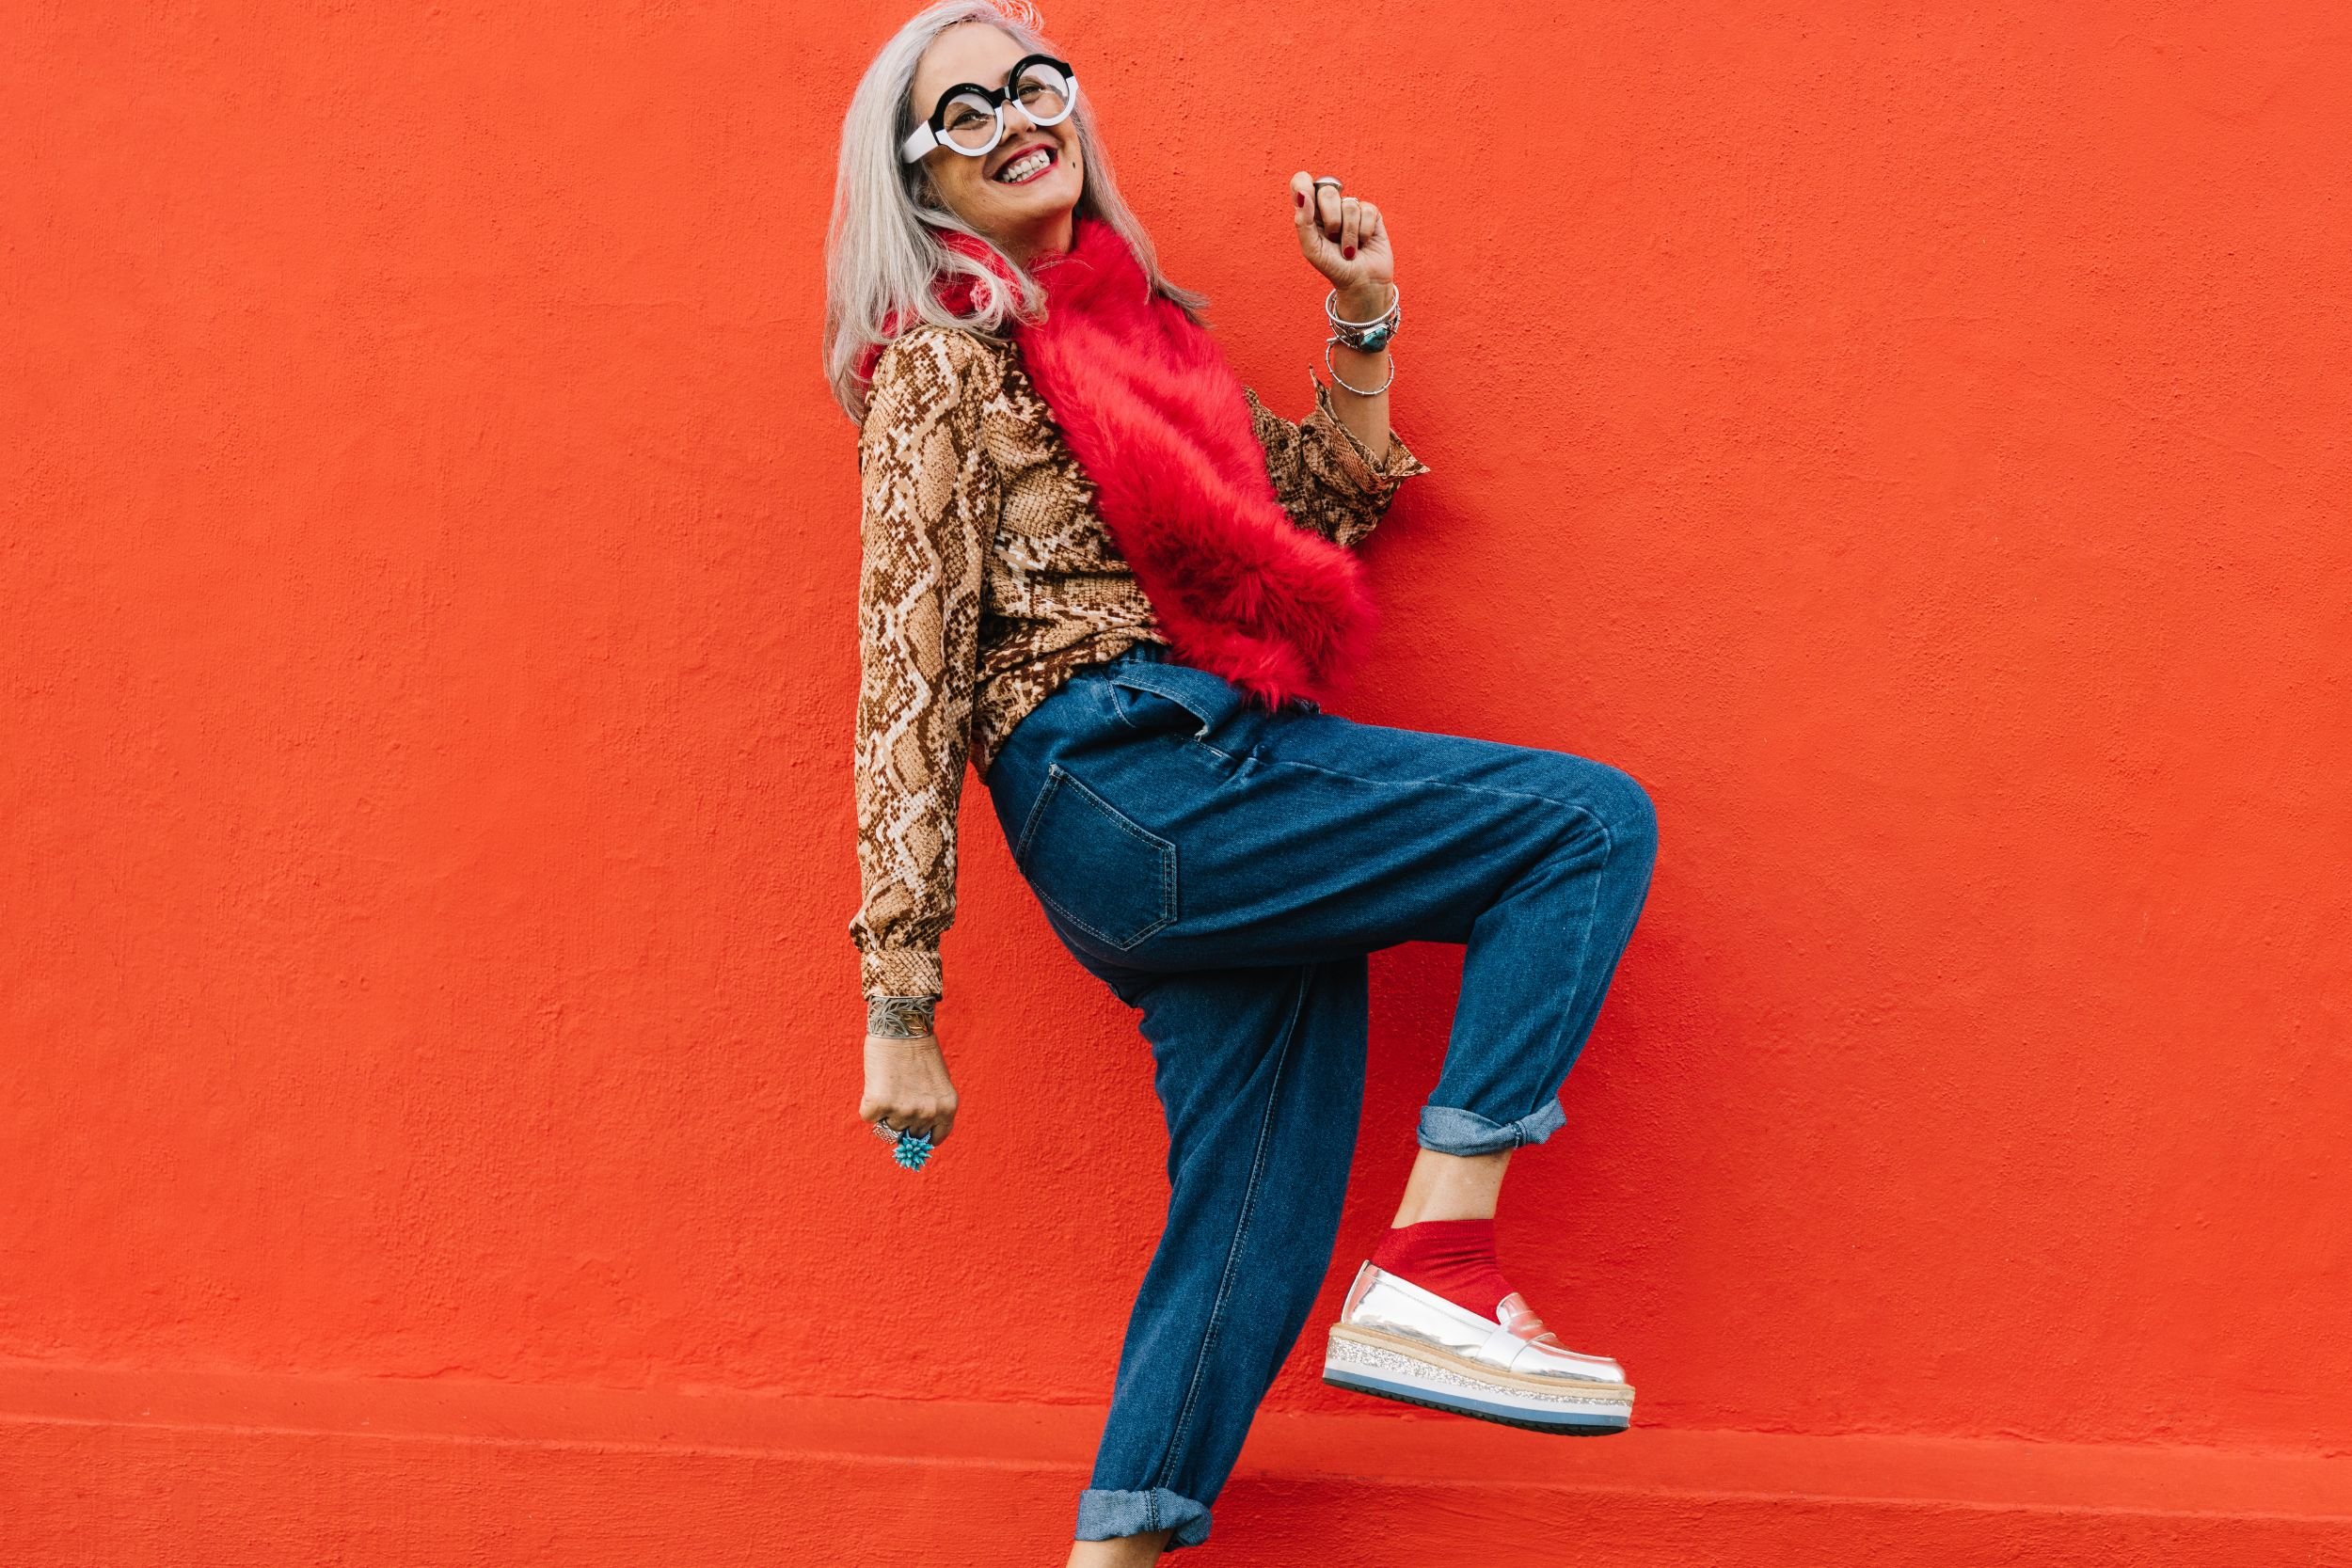 woman in her 40s wearing creative clothes posing playfully